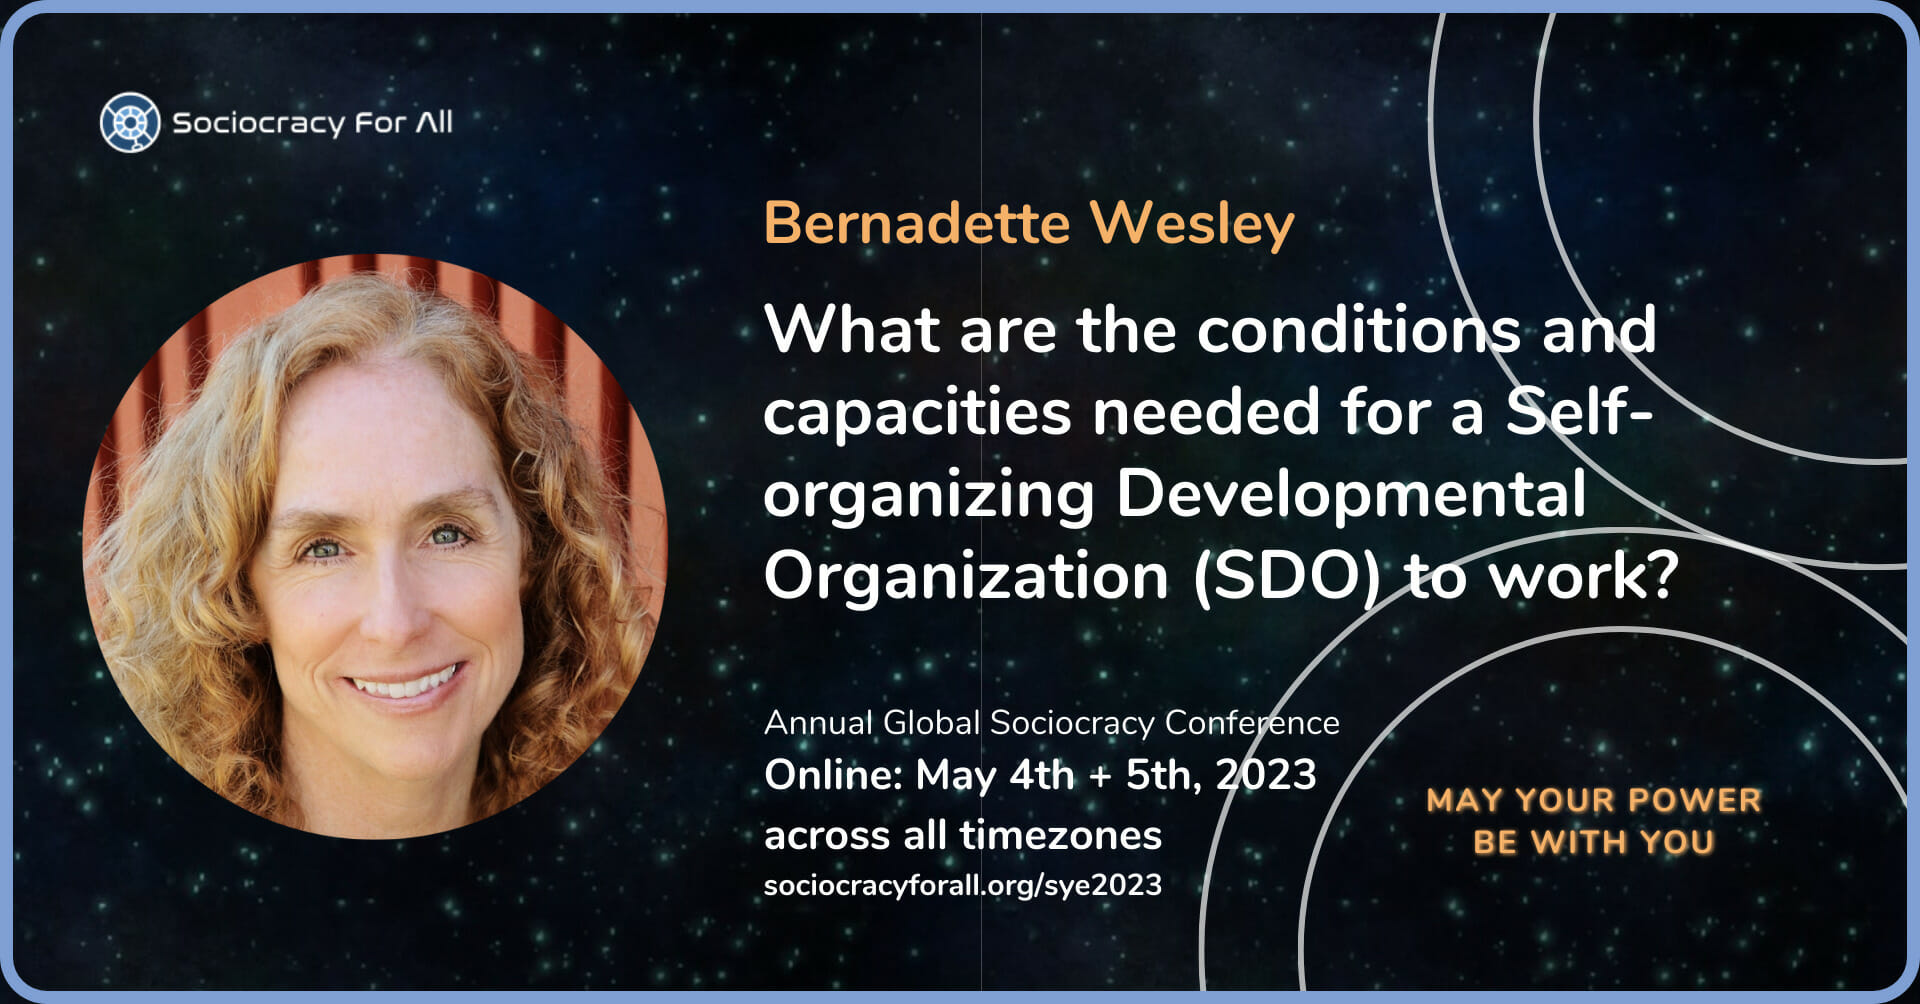 What are the conditions and capacities needed for a Self-organizing Developmental Organization (SDO) to work